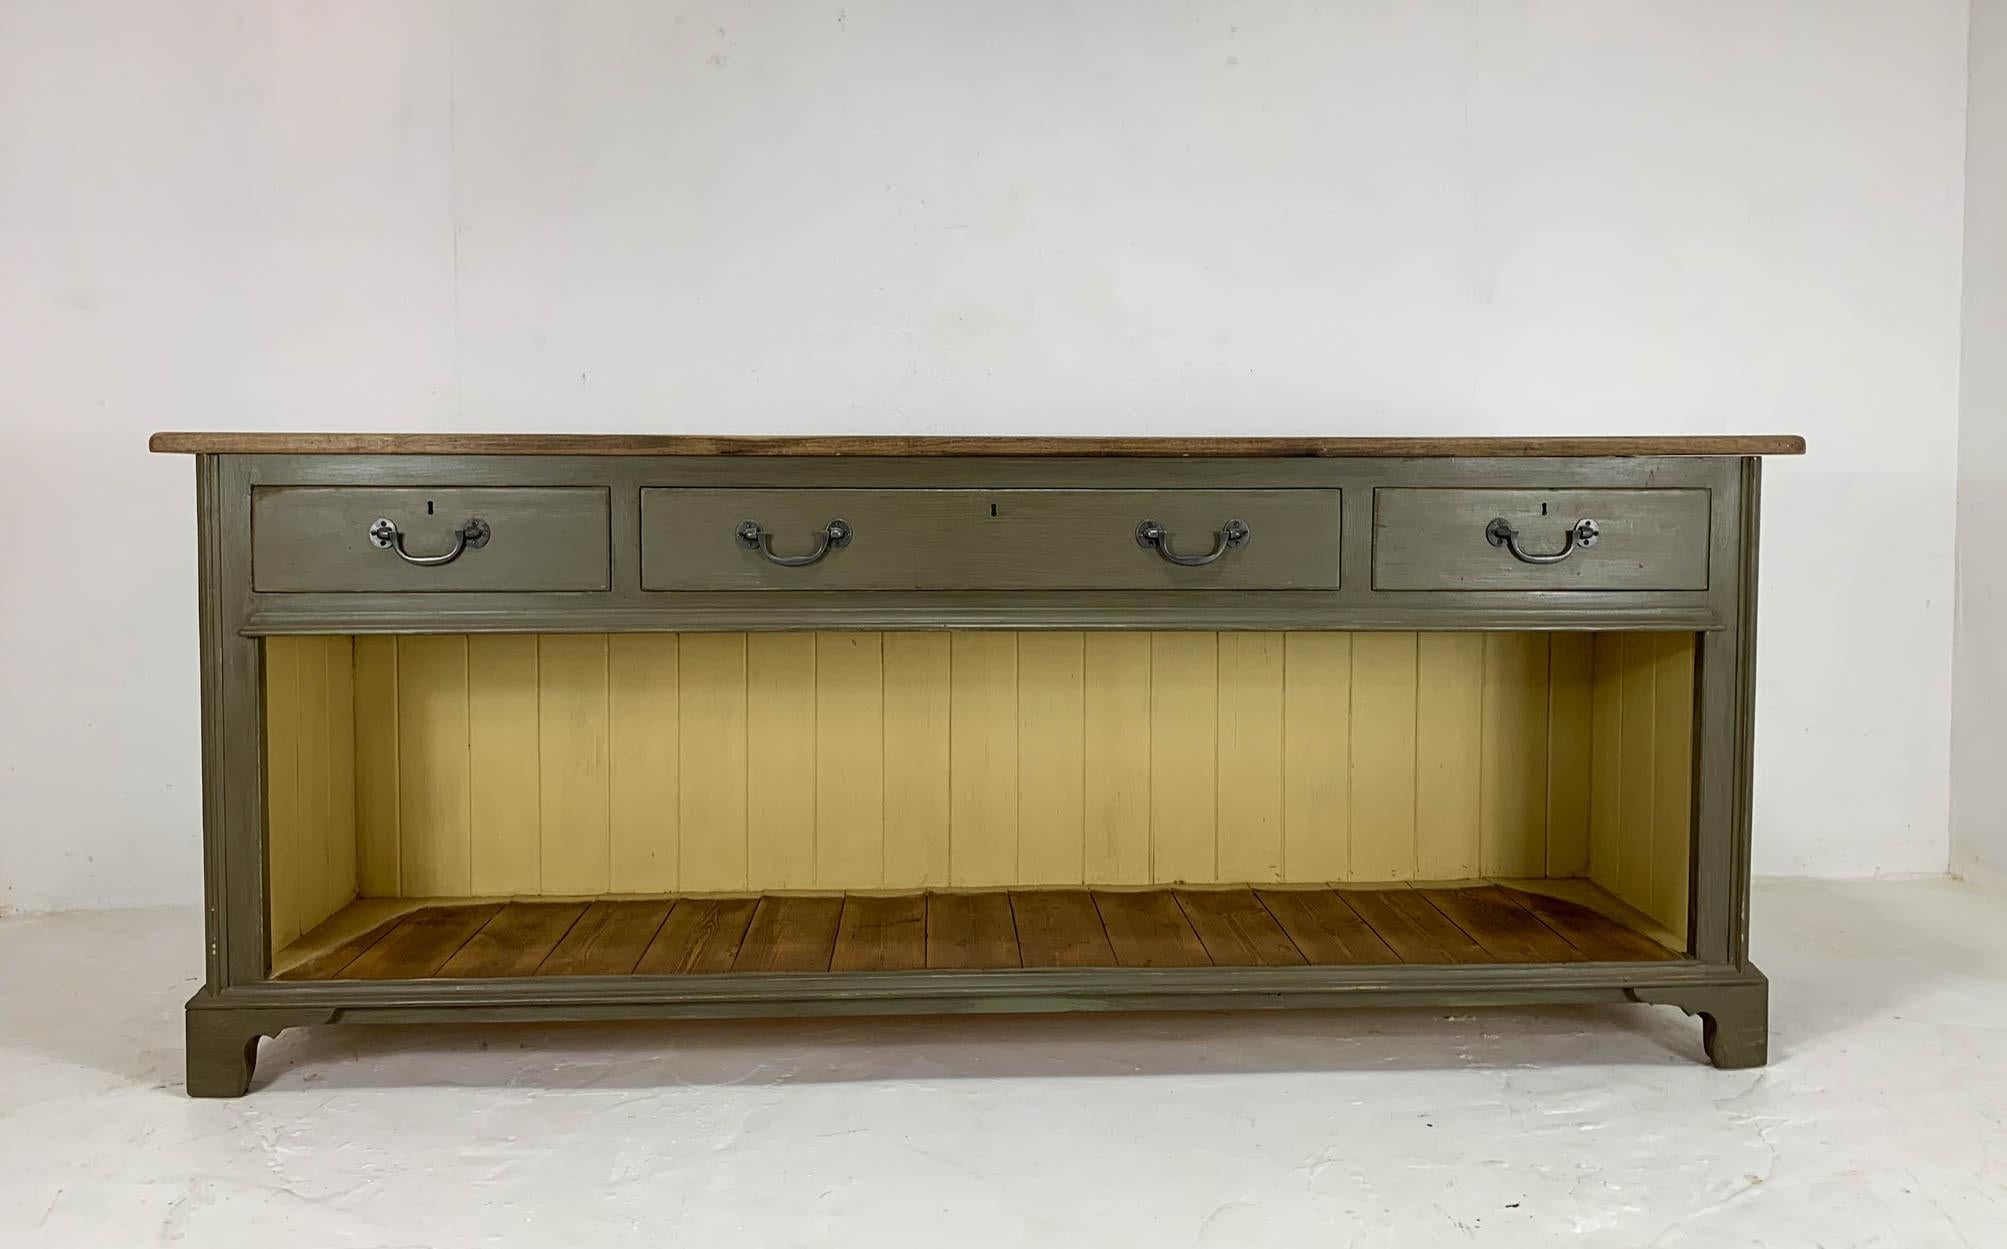 Restored English sideboard with stunning oak top. It has been recently painted in farrow and ball's ball green.
Feature three original drawers with reproduction drop handles and a potting board shelf below, great for displaying curated